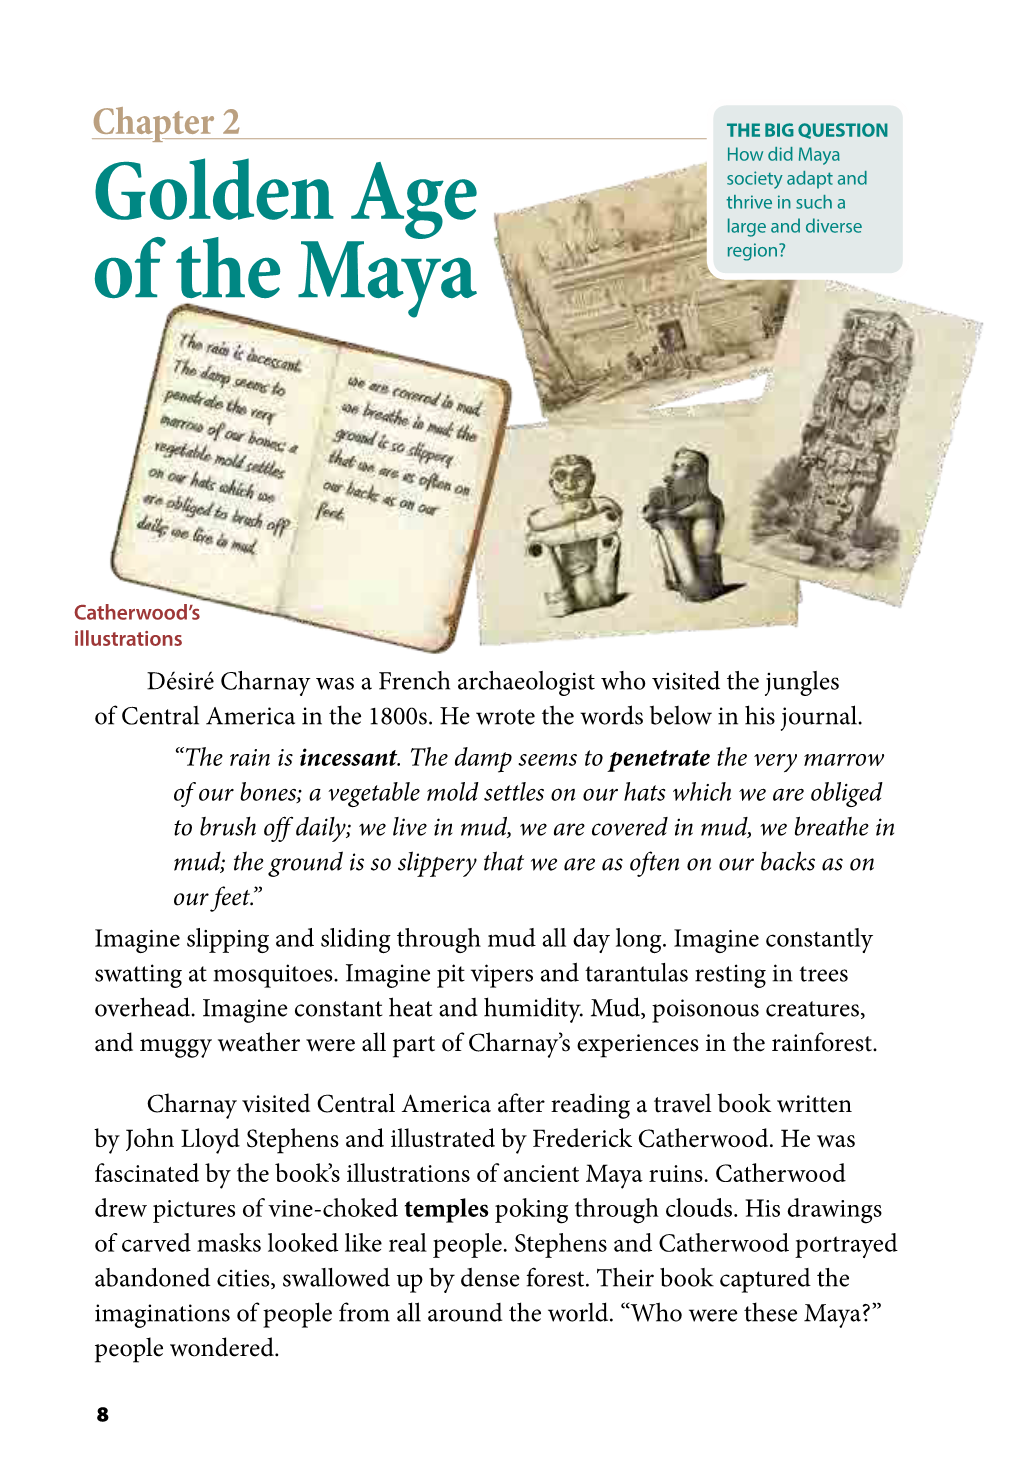 Golden Age of the Maya